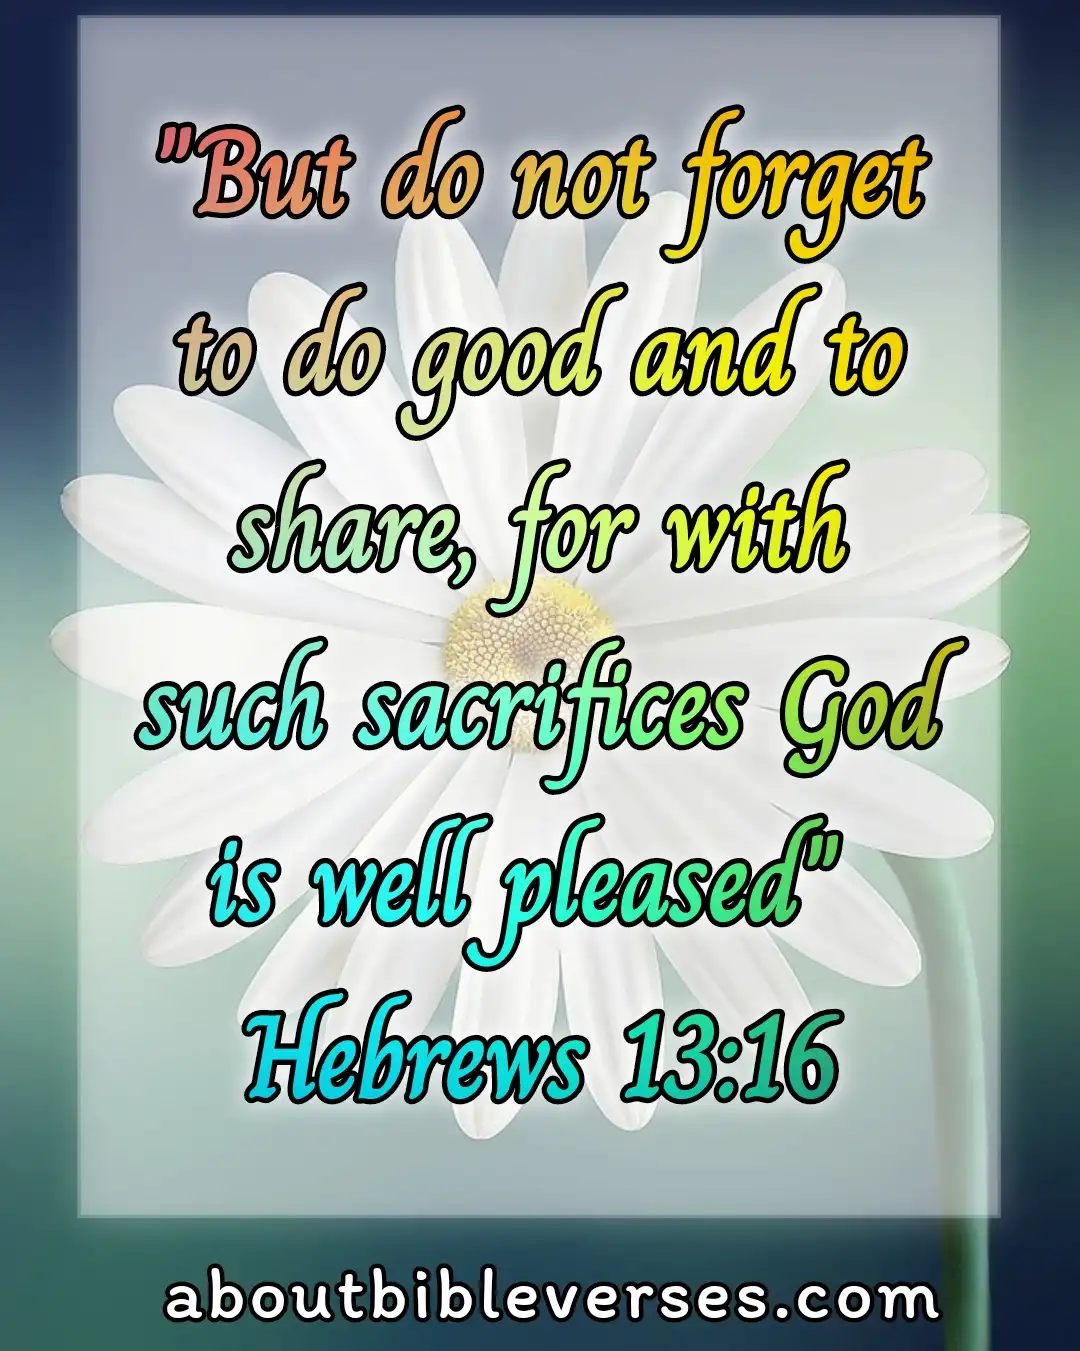 bible verses Helping To others (Hebrews 13:16)